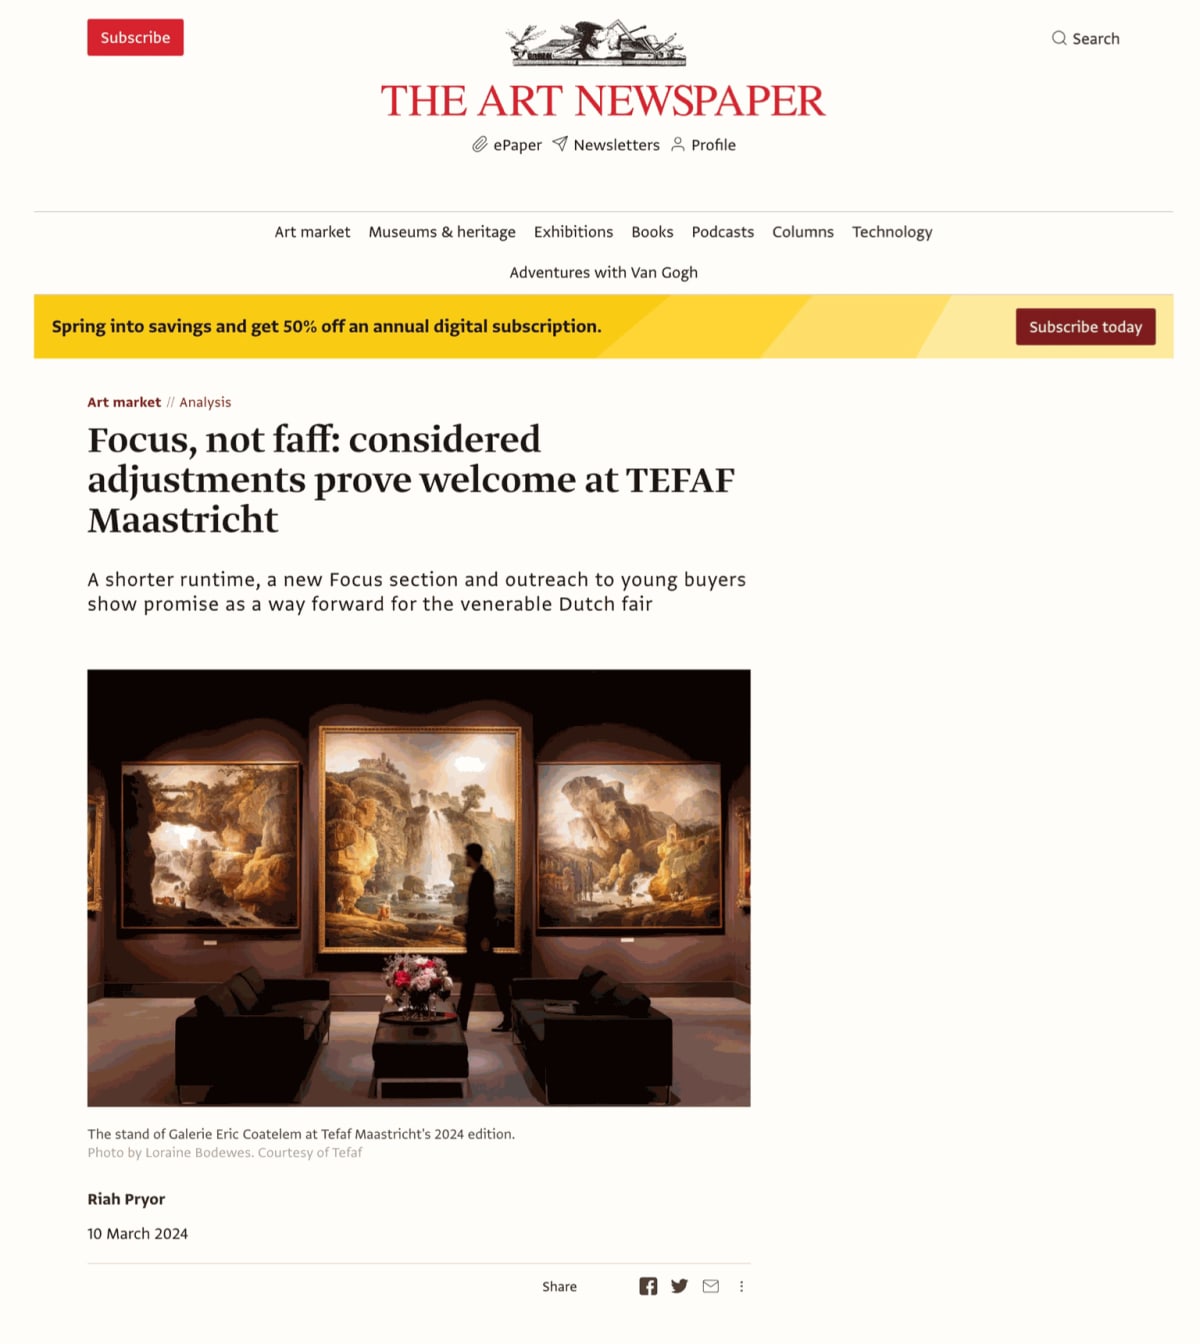 Focus, not faff: considered adjustments prove welcome at TEFAF Maastricht, A shorter runtime, a new Focus section and outreach to...